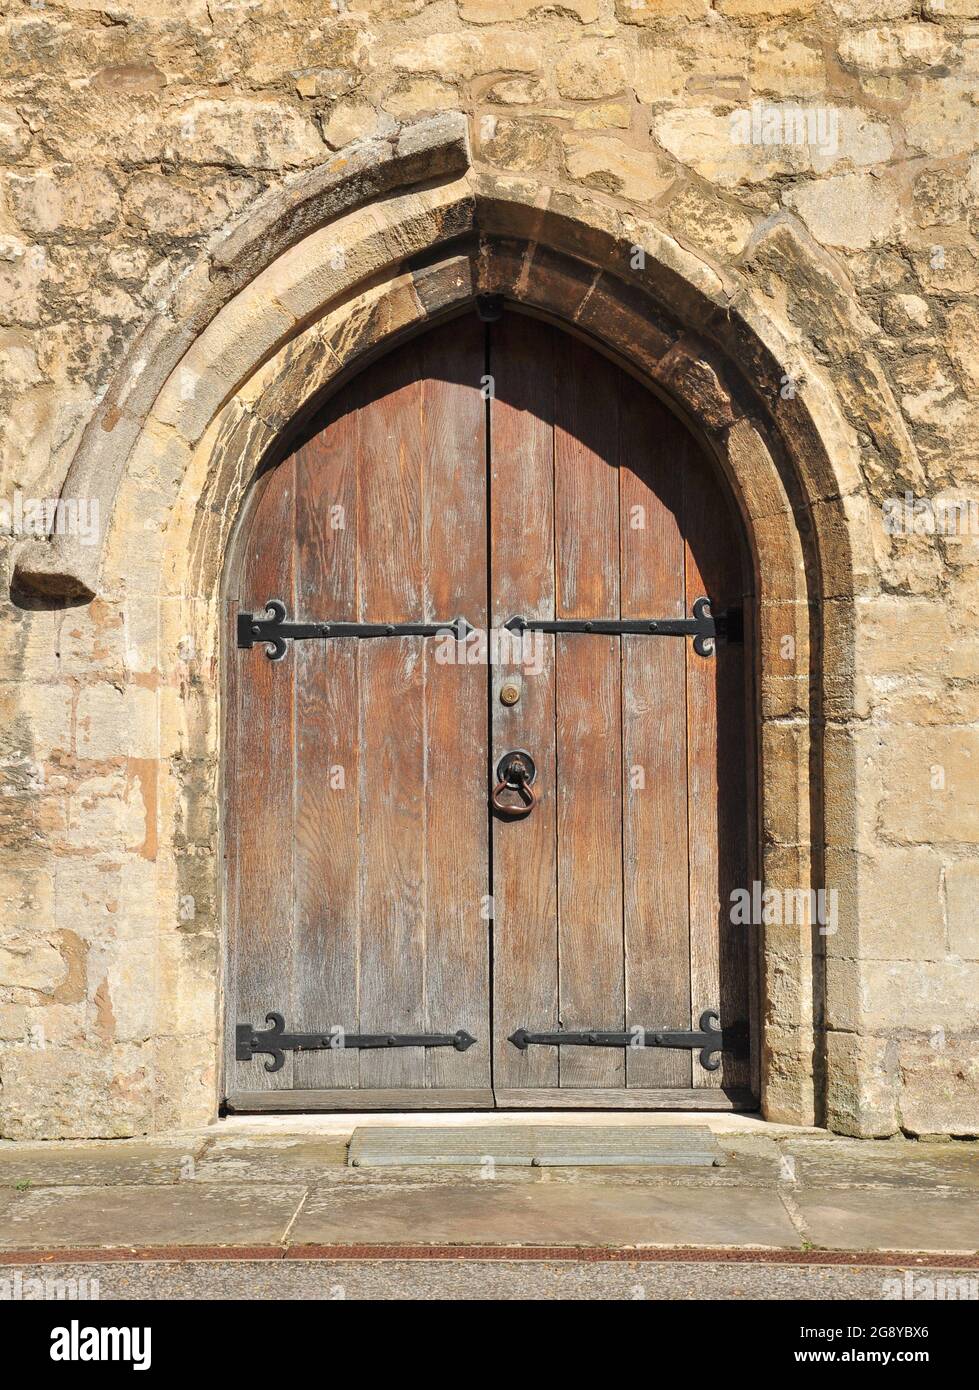 Door to Prior Crauden's Chapel (built in 1321 close to Ely Cathedral and used by the King's School), Ely, Cambridgeshire, England, UK Stock Photo